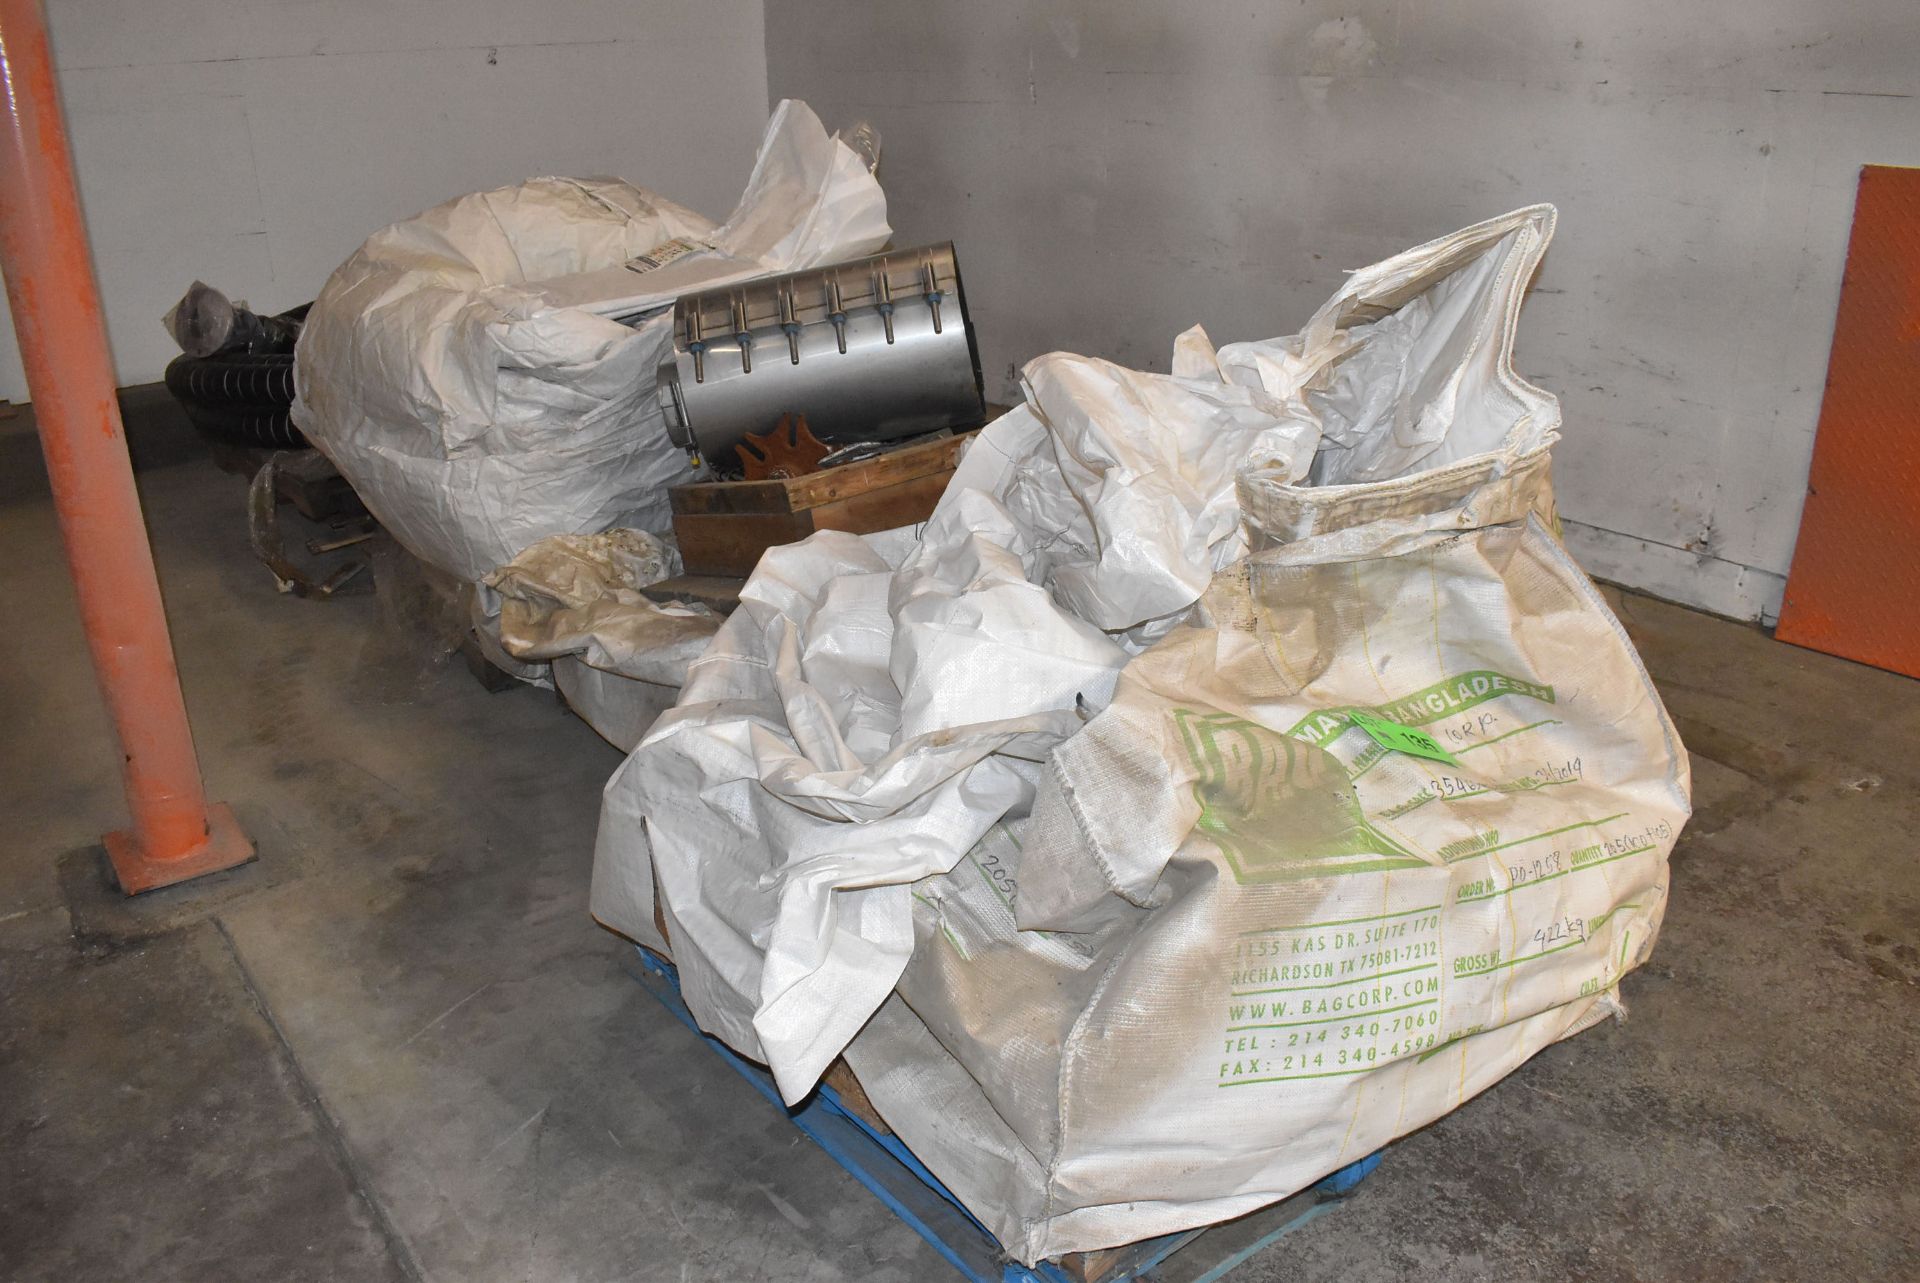 LOT/ CONTENTS OF PALLETS CONSISTING OF GAYLORD BAGS, HOSE AND STAINLESS STEEL CLAMPS [RIGGING FEE - Image 6 of 6